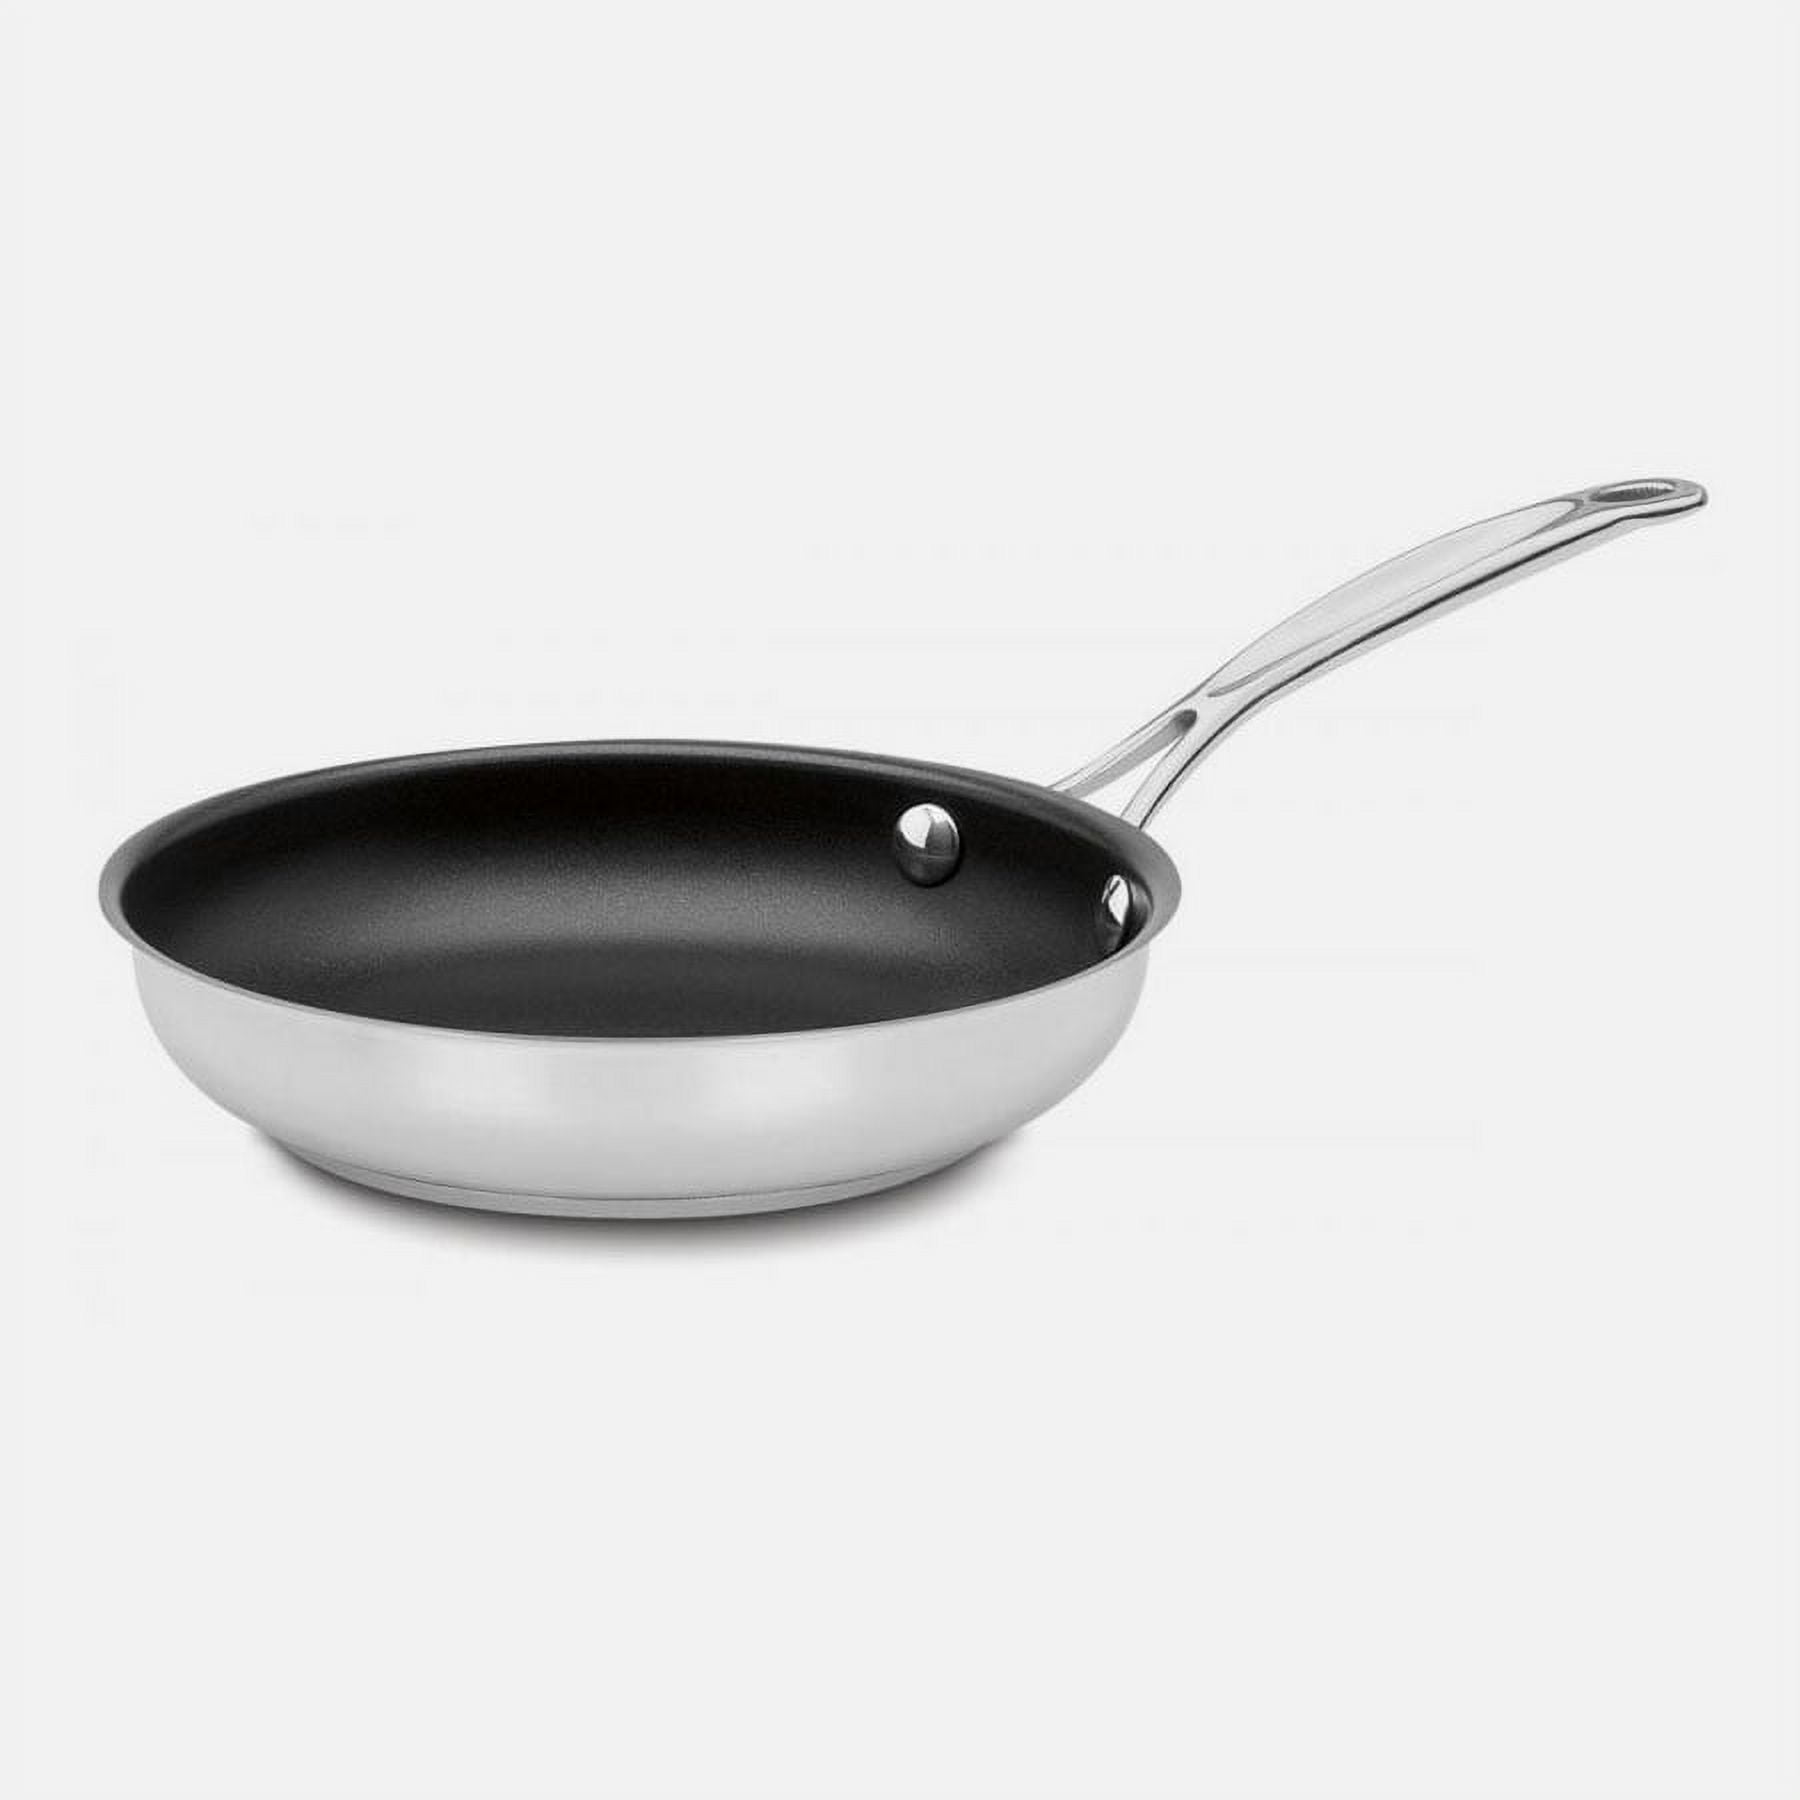 Cuisinart Chef's Classic Nonstick Hard Anodized 10 Crepe Pan